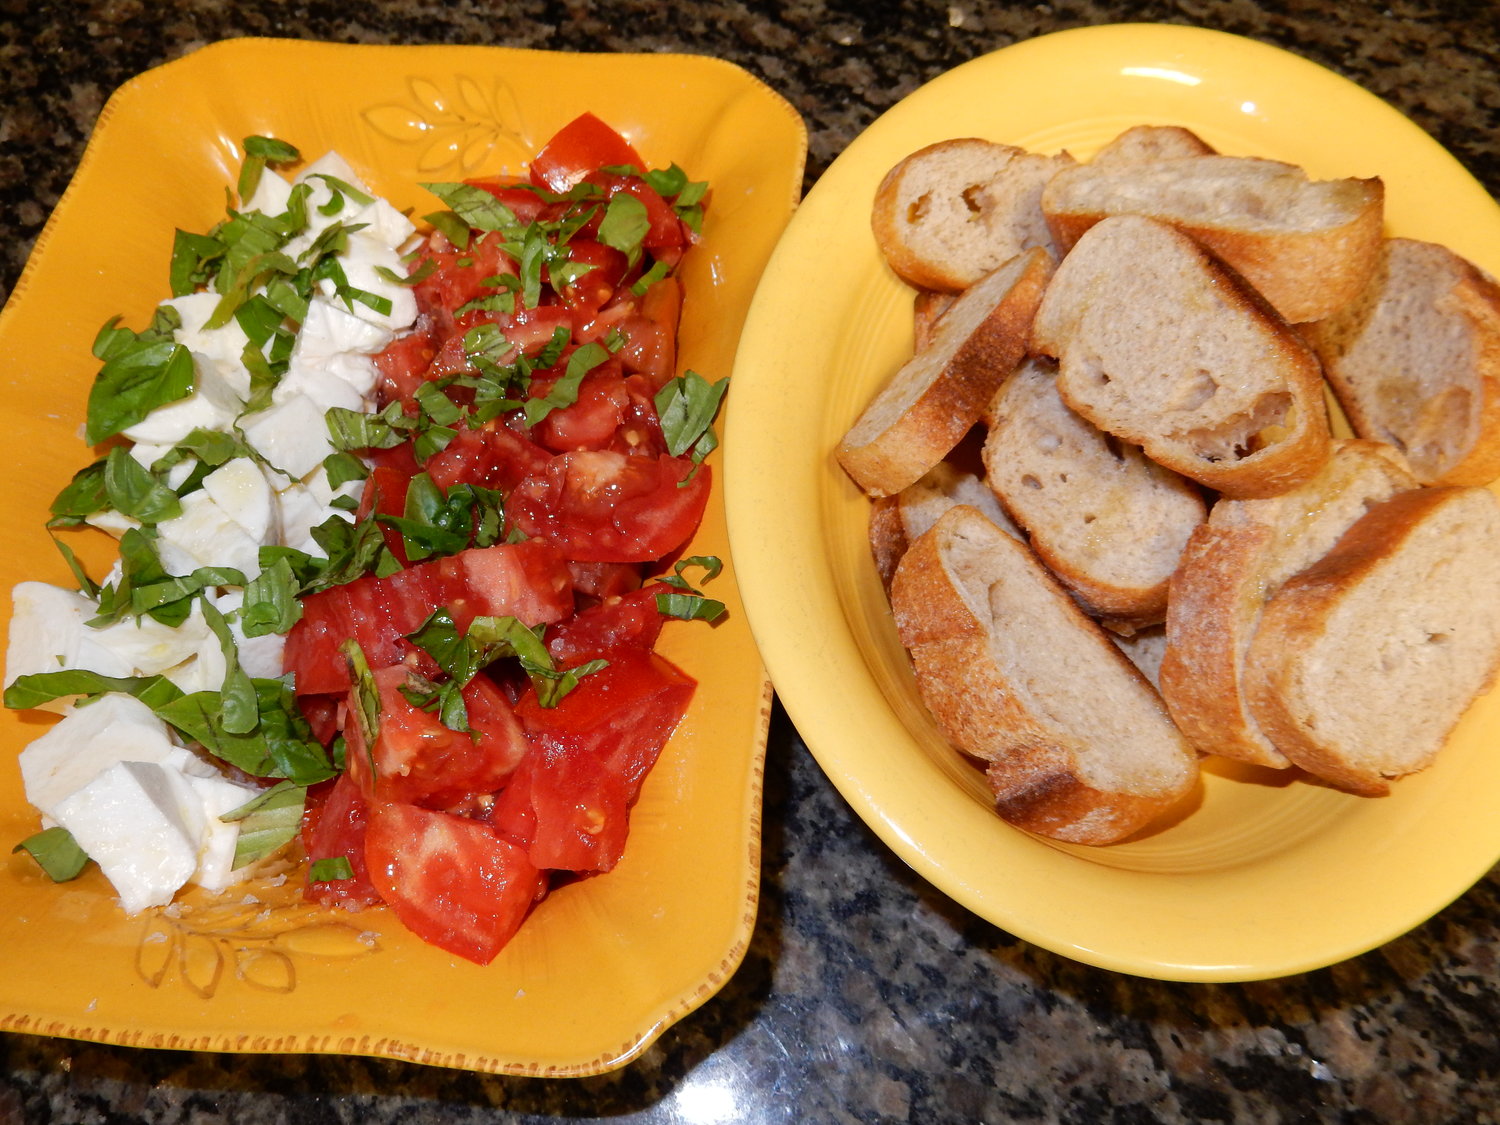 Caprese salad, one of Italy's gifts.